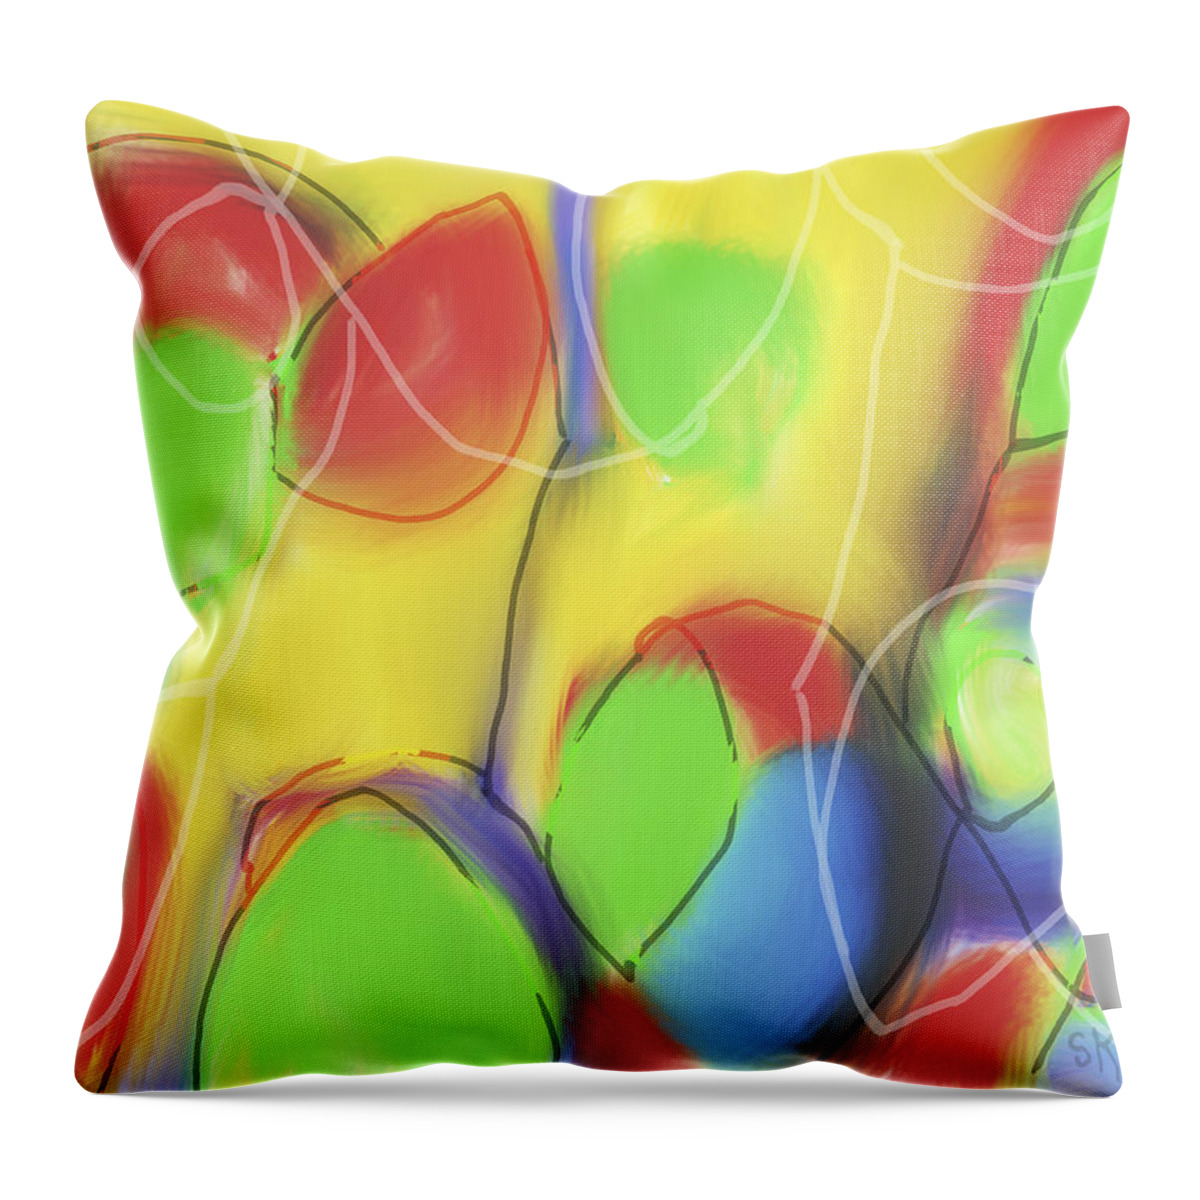 Green Art Throw Pillow featuring the painting Broken Lines by Susan Stone